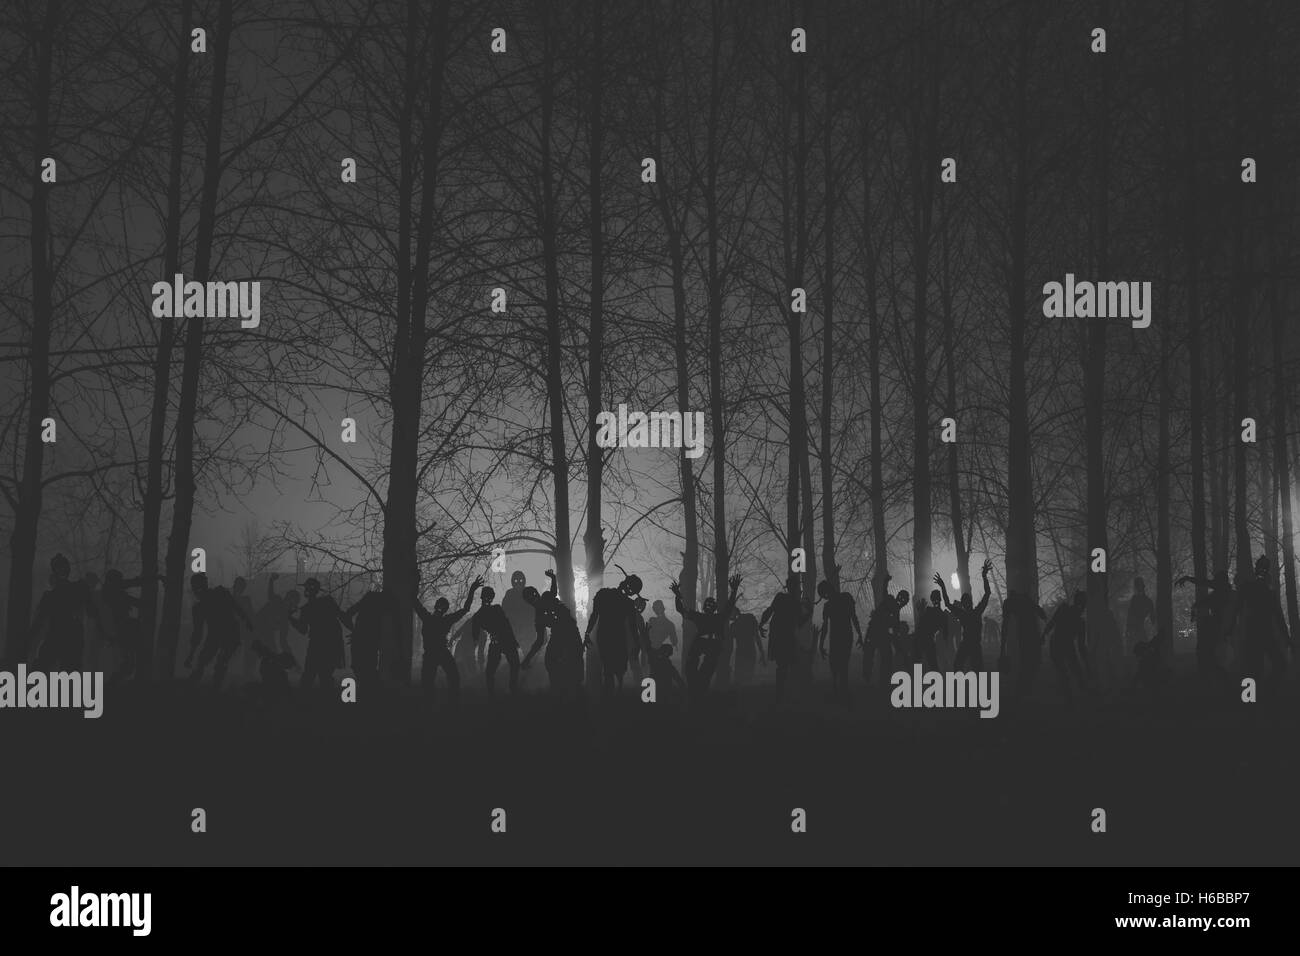 crowd of hungry zombies in the woods. Silhouettes of scary zombies walking in the forest at night. Black and white version Stock Photo